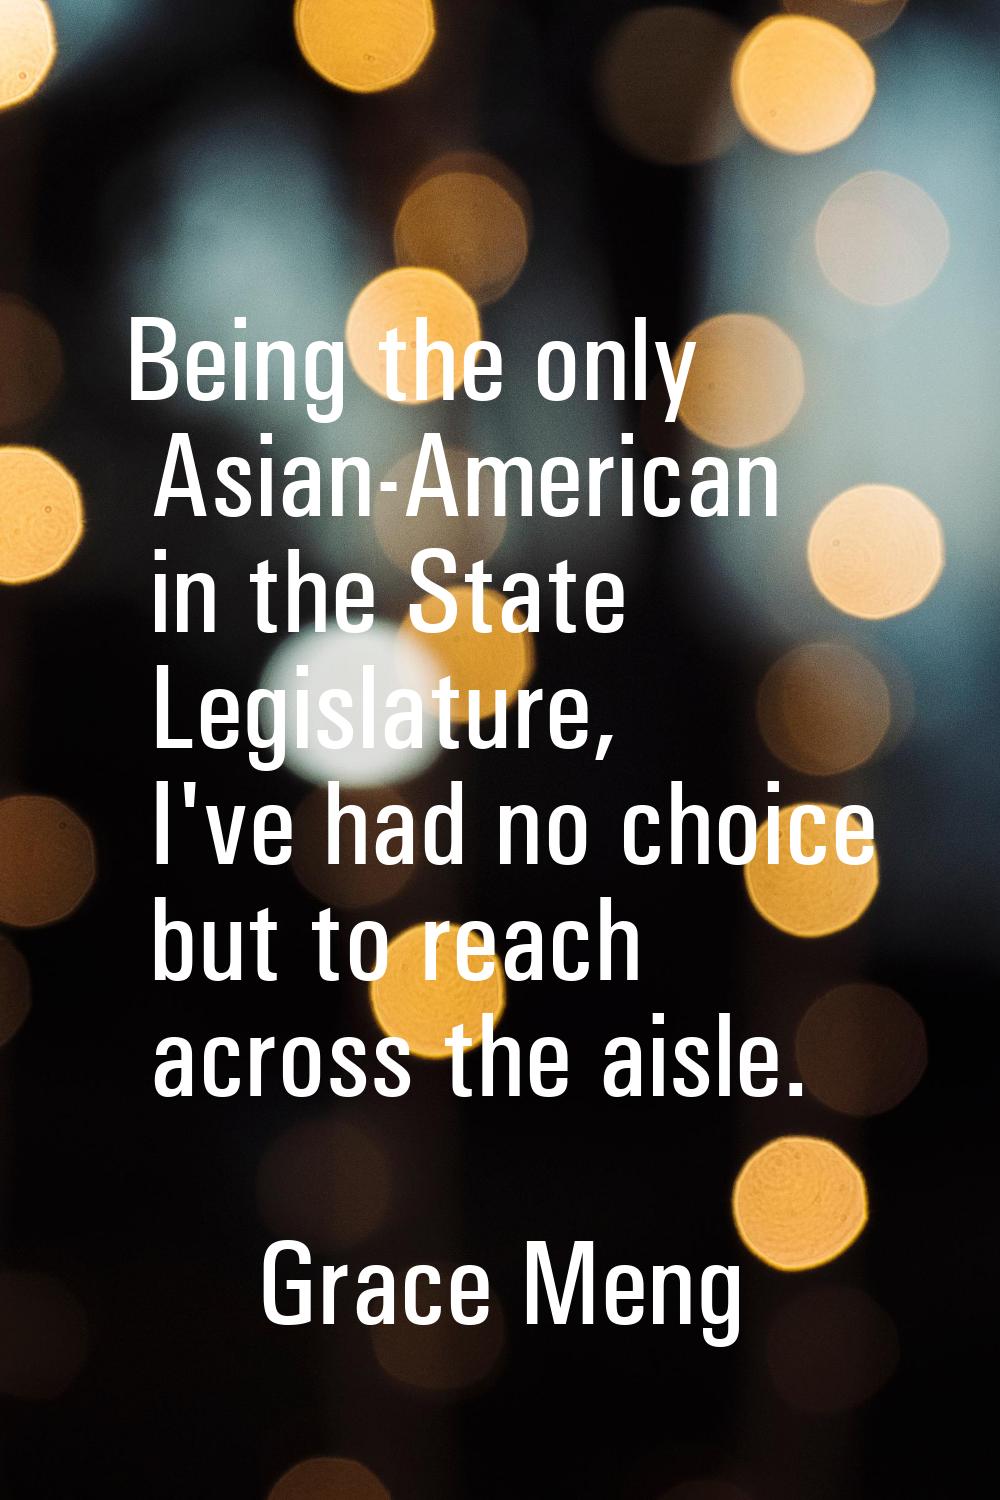 Being the only Asian-American in the State Legislature, I've had no choice but to reach across the 